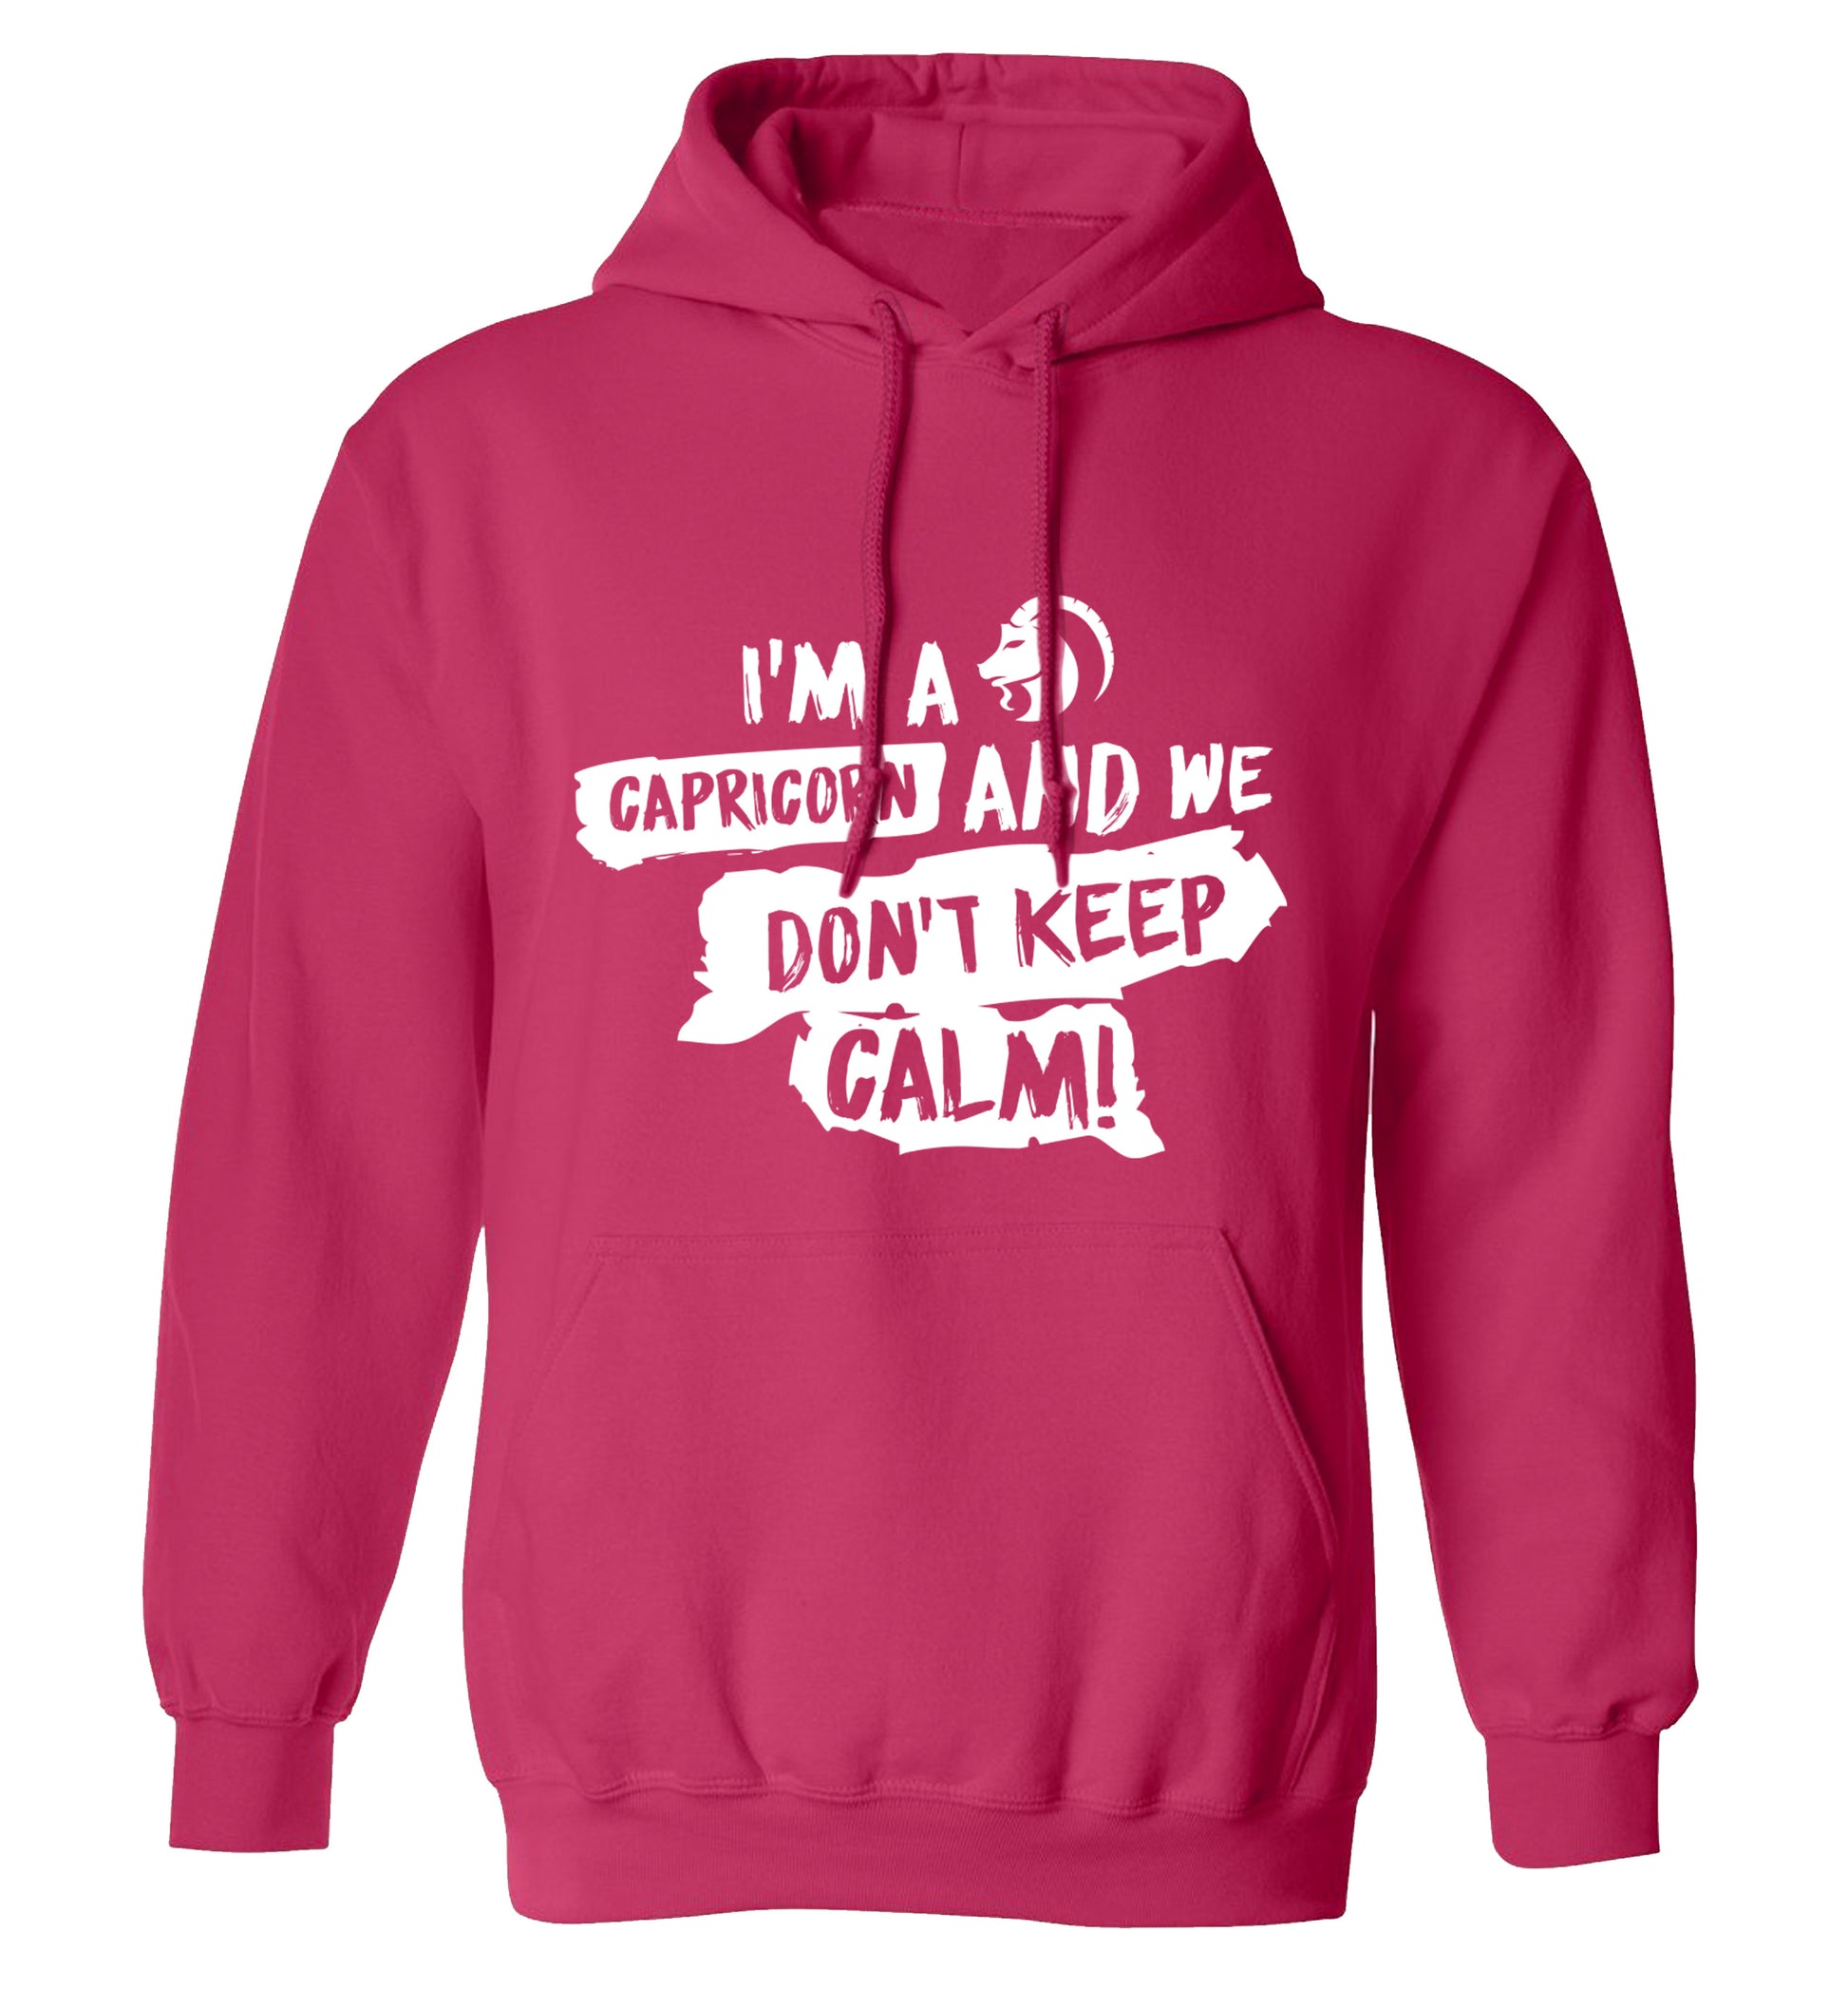 I'm a capricorn and we don't keep calm adults unisex pink hoodie 2XL